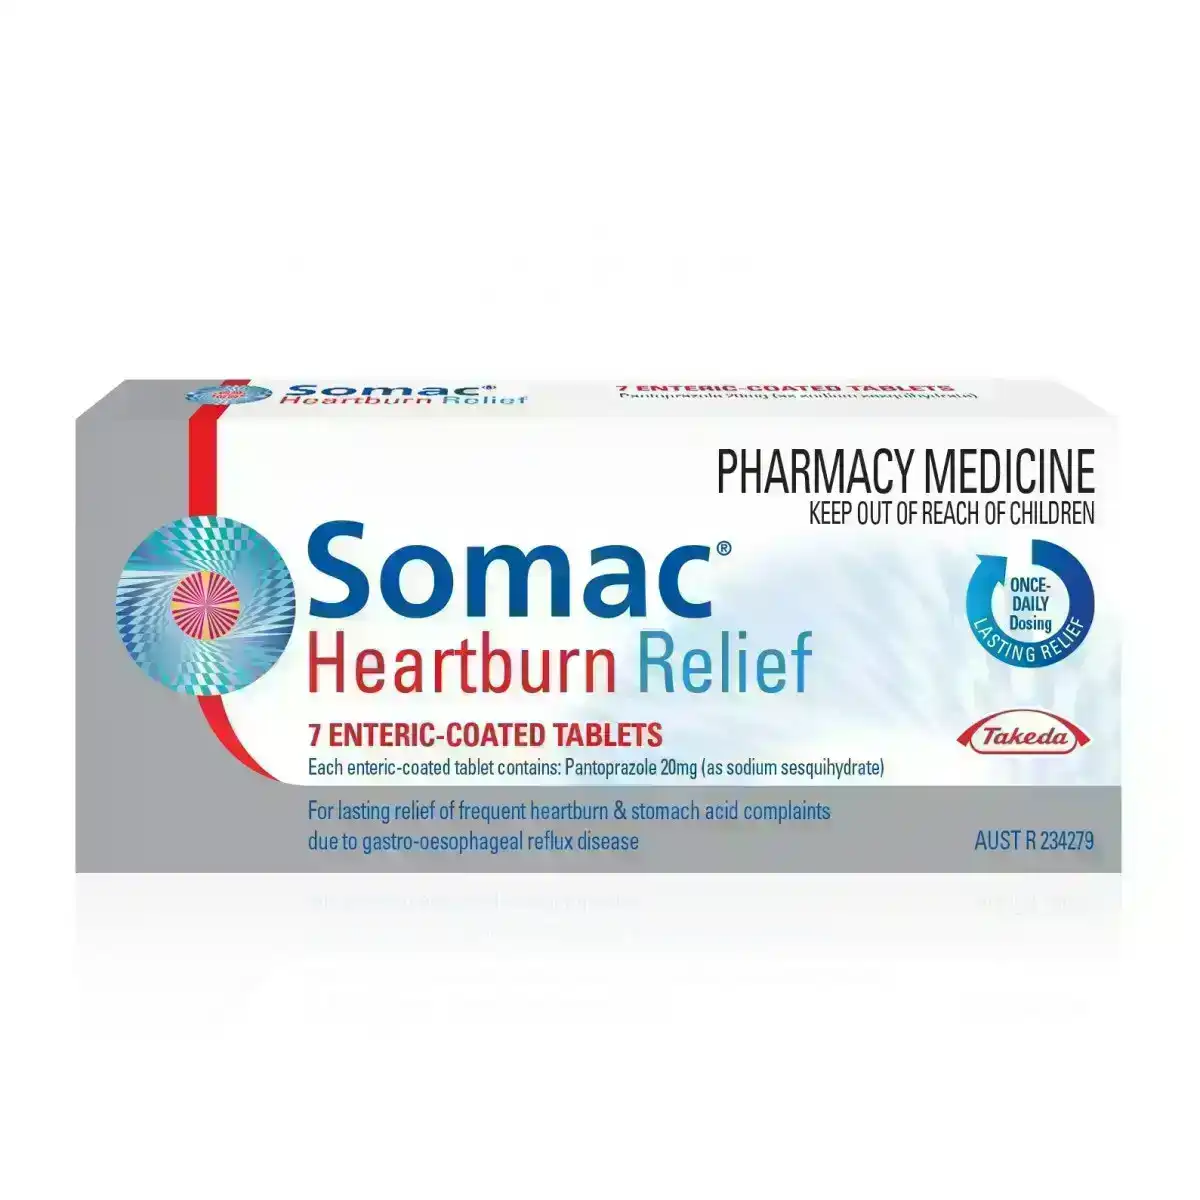 SOMAC Heartburn Relief 7 Enteric Coated Tablets